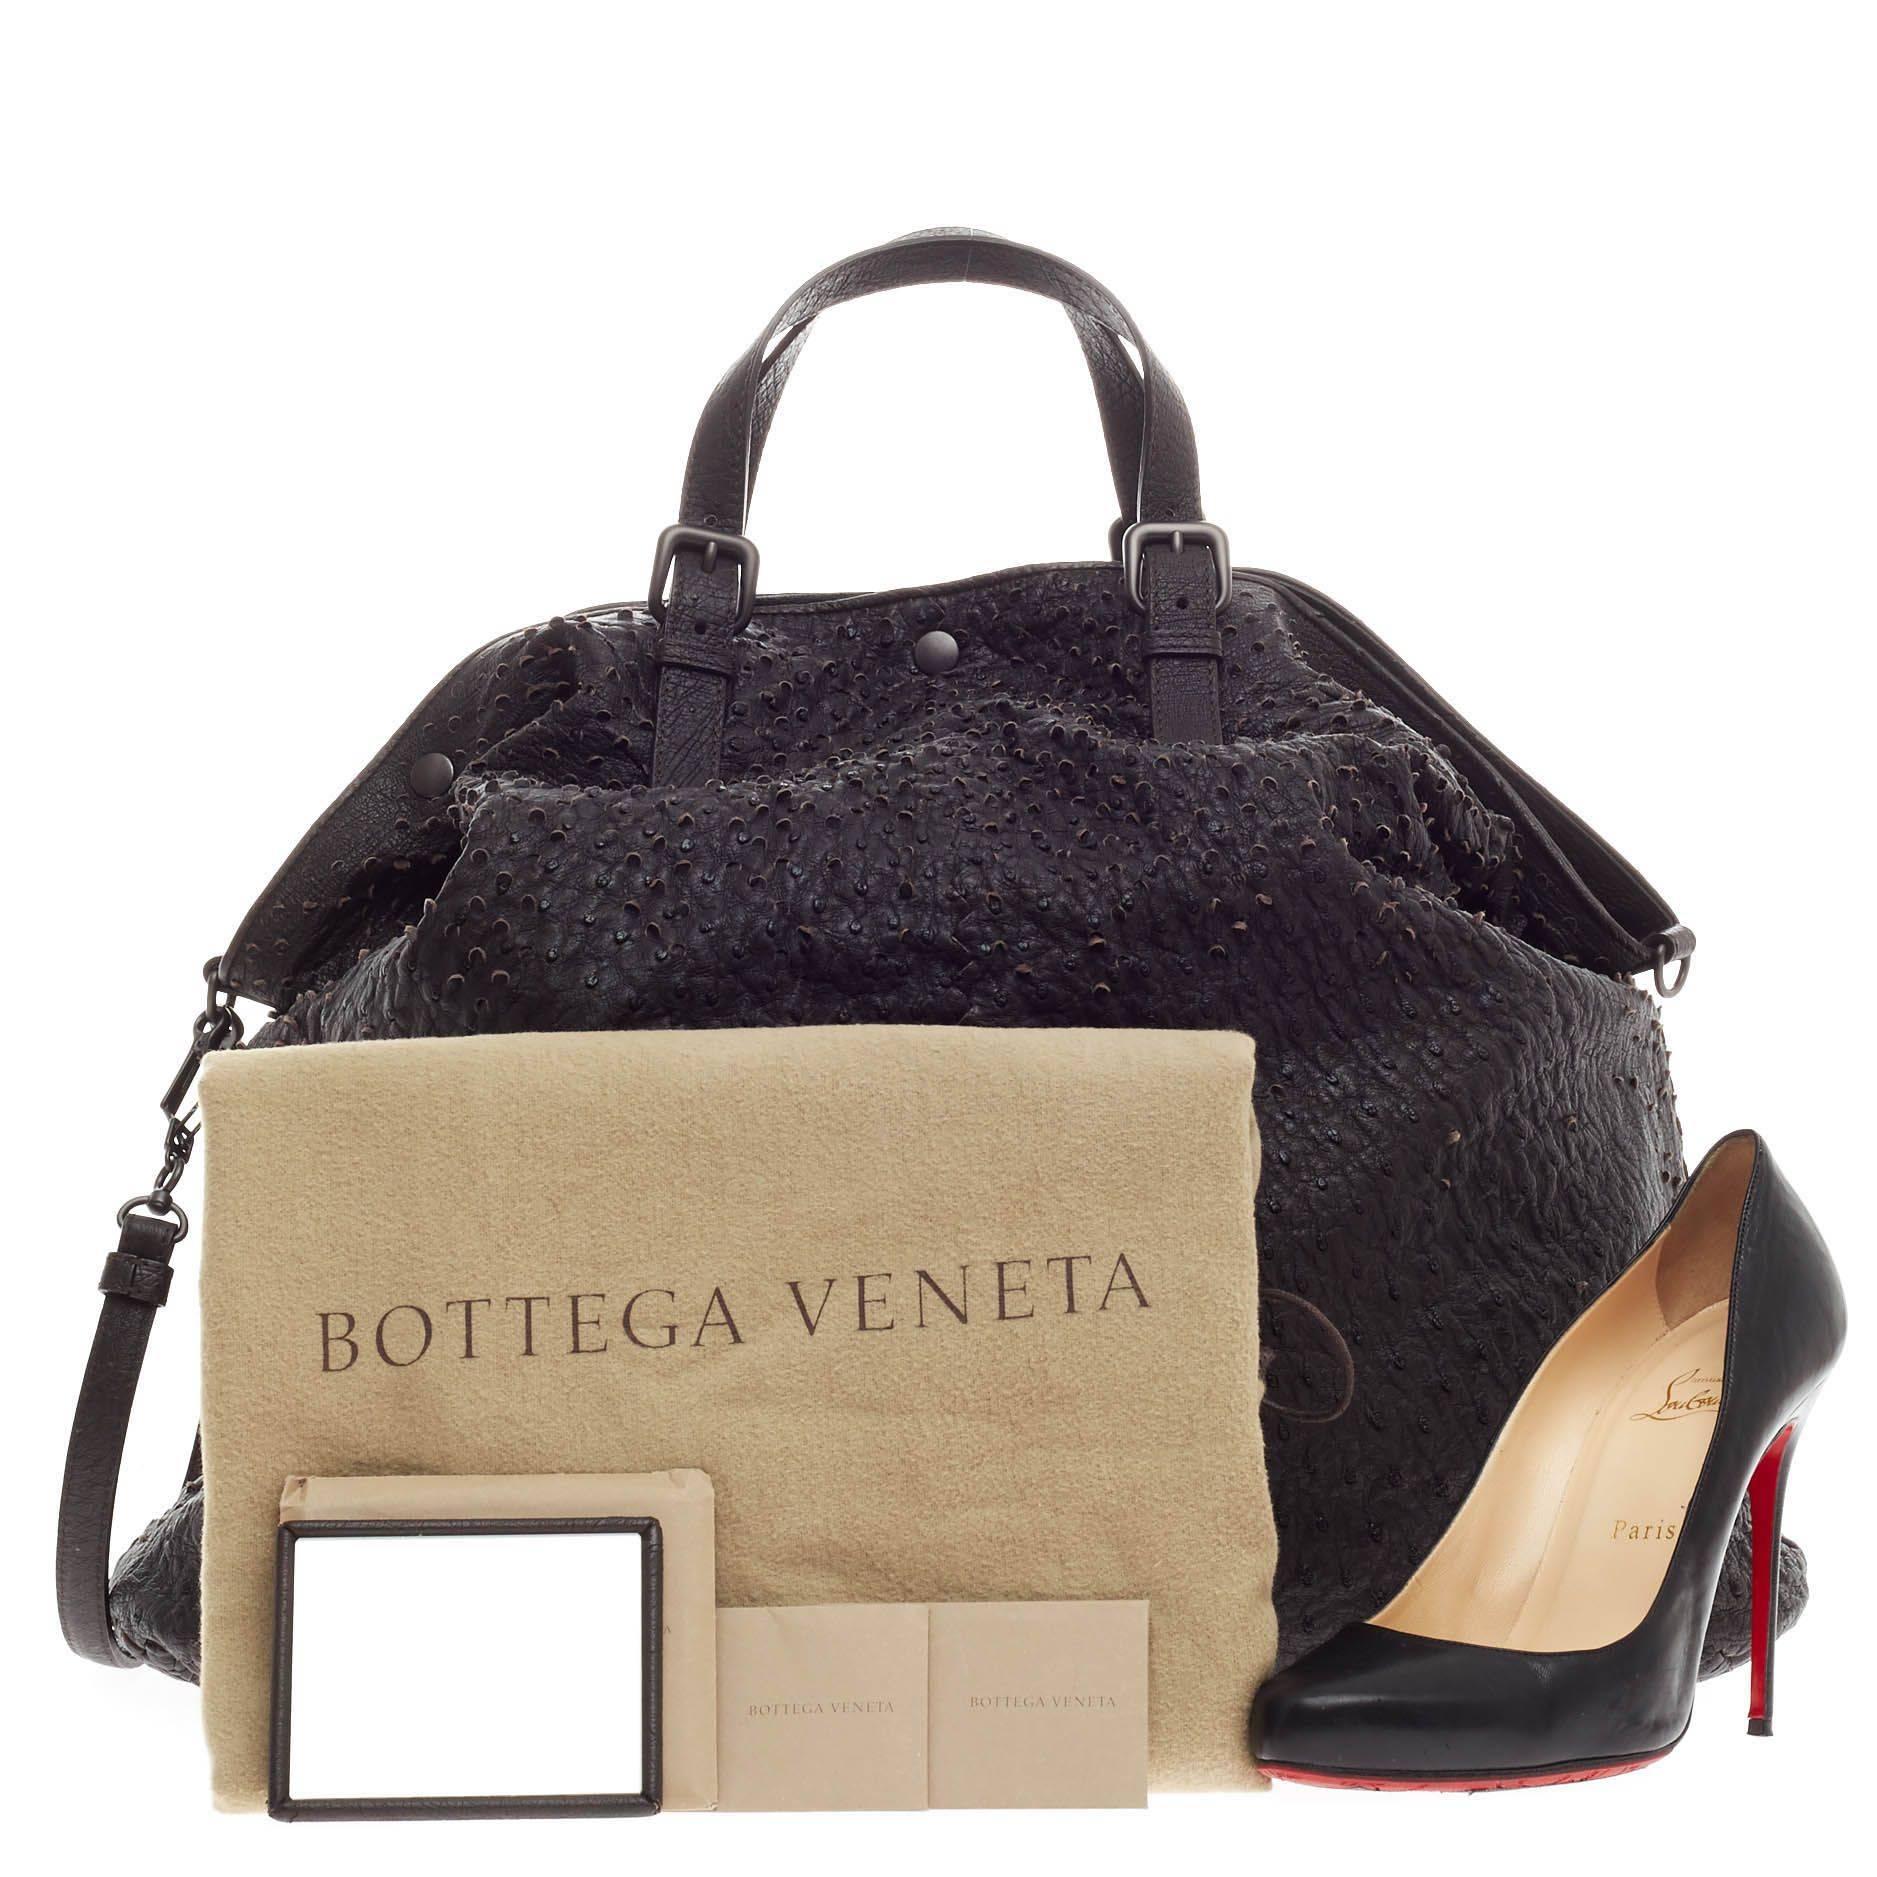 This authentic Bottega Veneta Scaglie Convertible Tote Ostrich with Intrecciato Trim Large is a rare, luxurious, understated tote made for everyday excursions and light traveling. Crafted from ebano dark brown genuine ostrich skin, this oversized